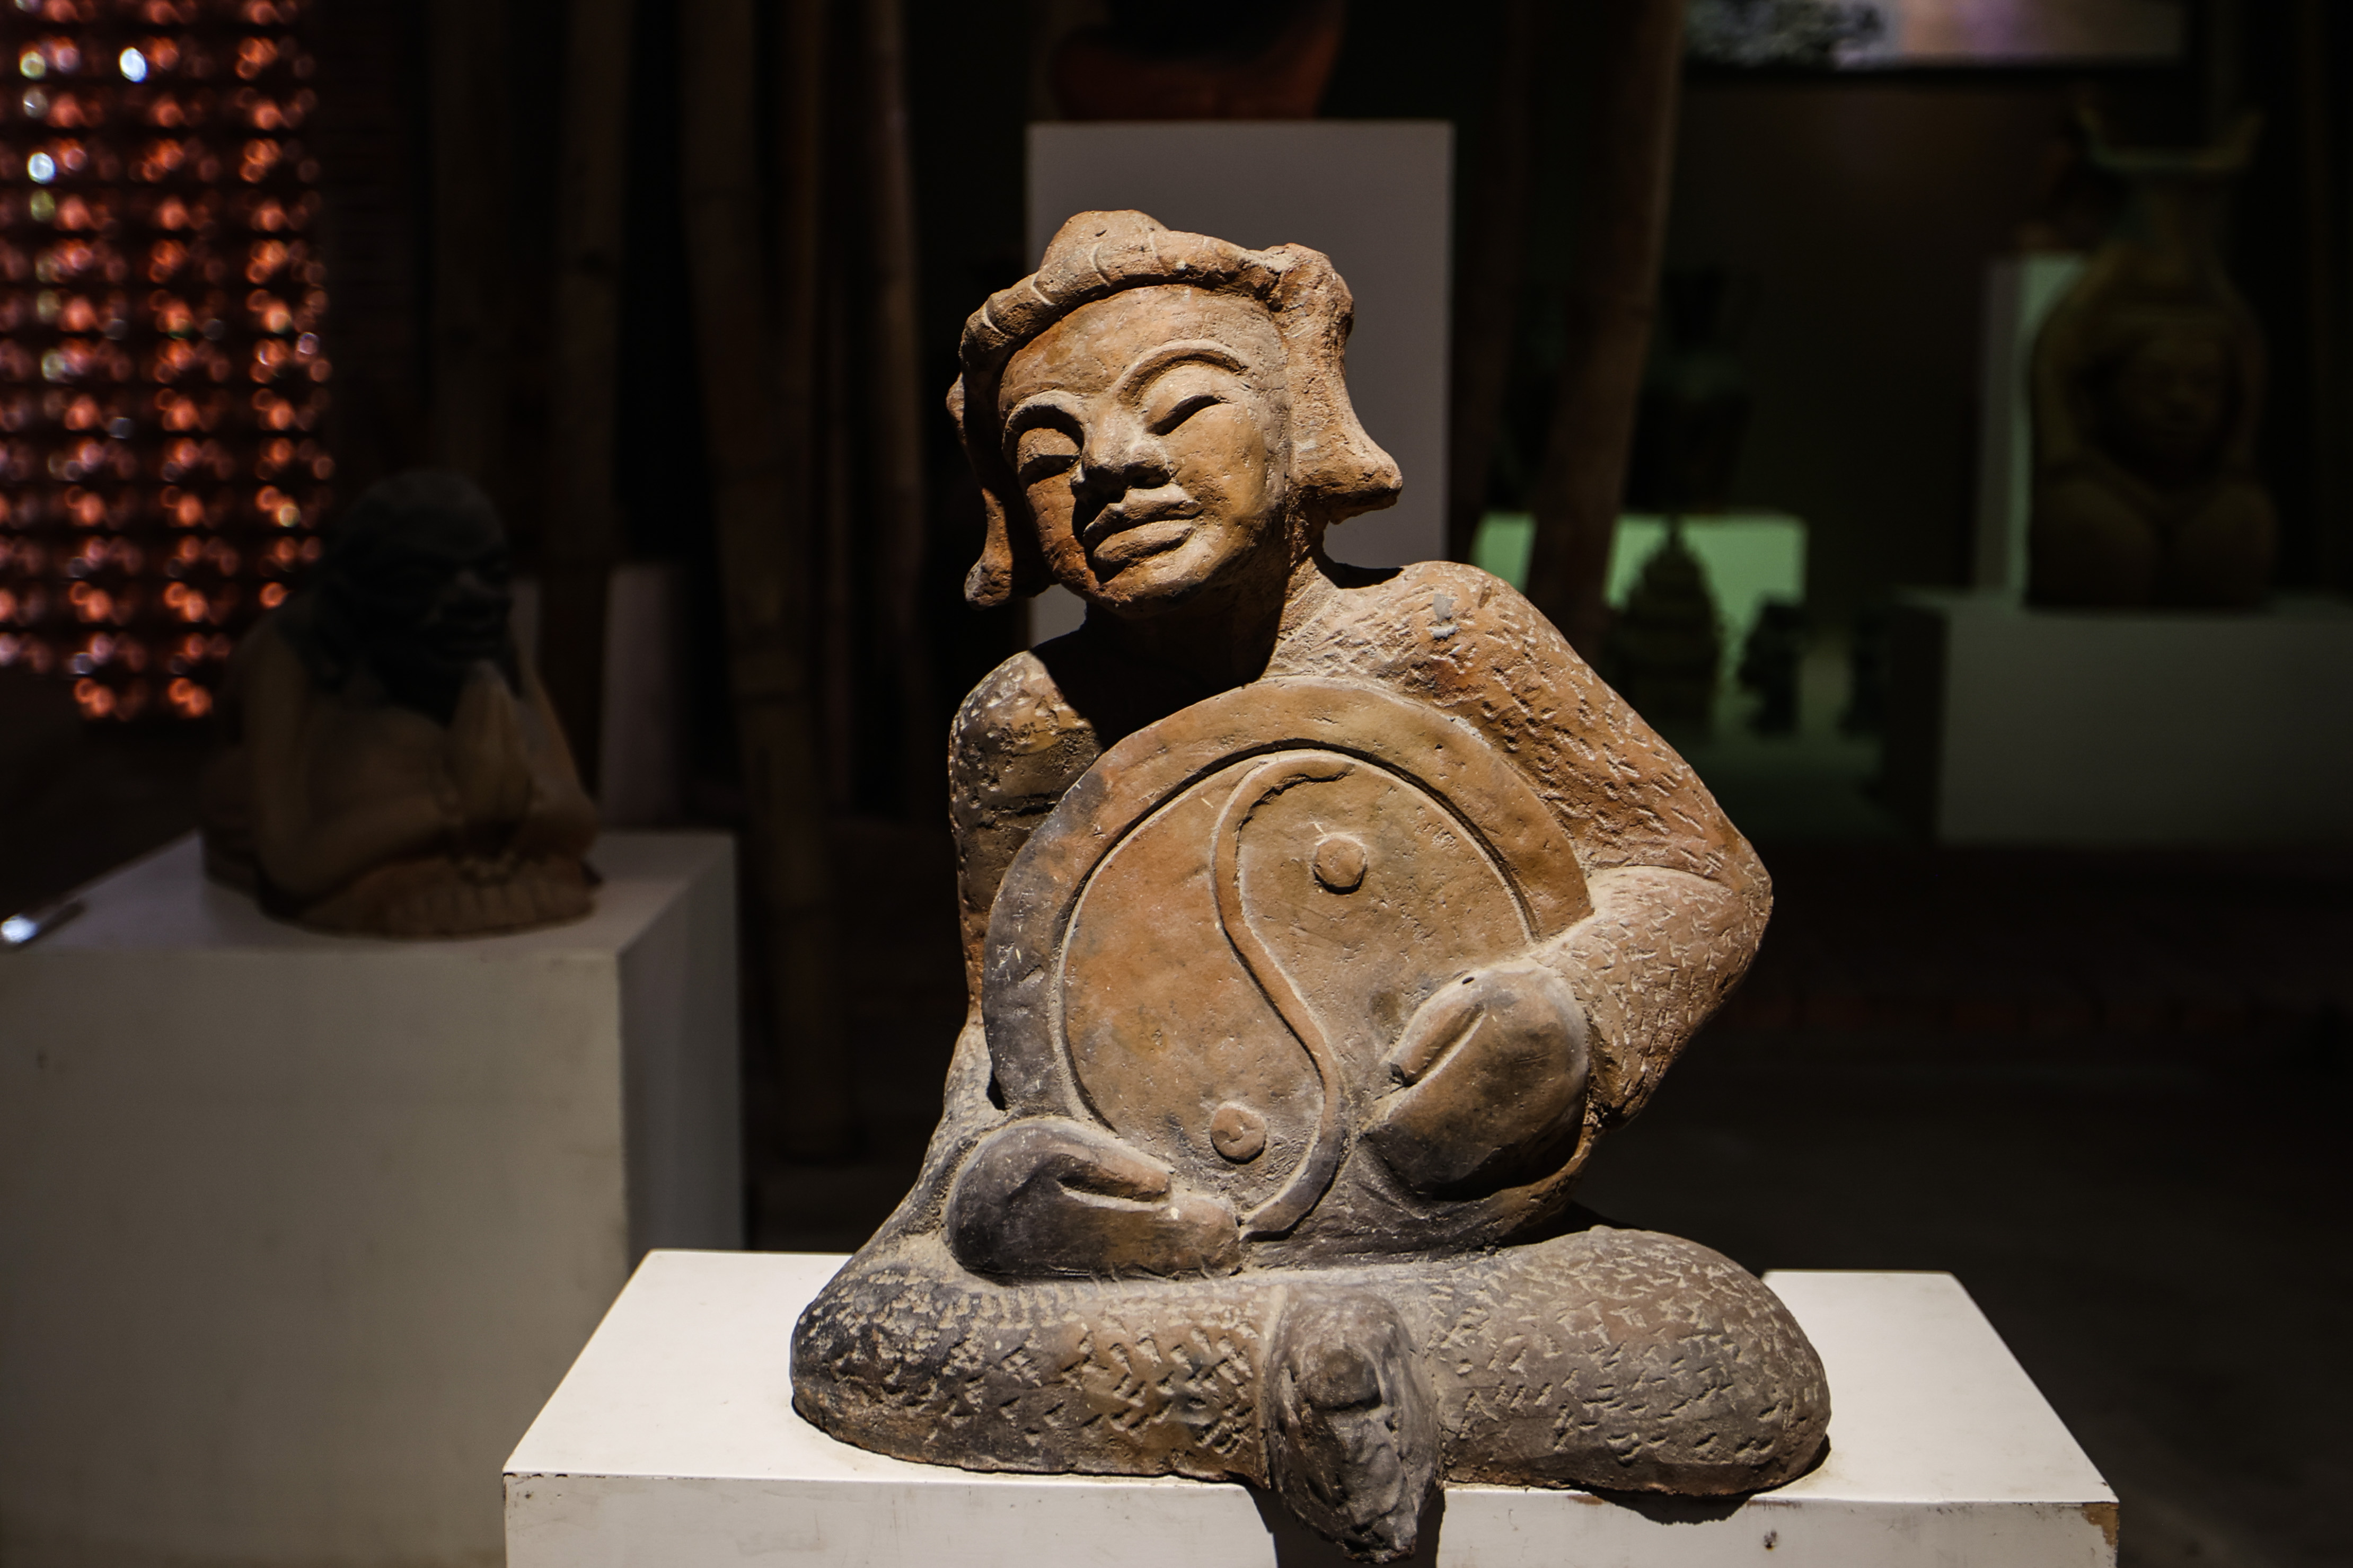 A pottery statue on display at Thanh Ha Pottery Park in Thanh Ha Pottery Village, Thanh Ha Ward, Hoi An City, Quang Nam Province. Photo: Nguyen Khanh / Tuoi Tre